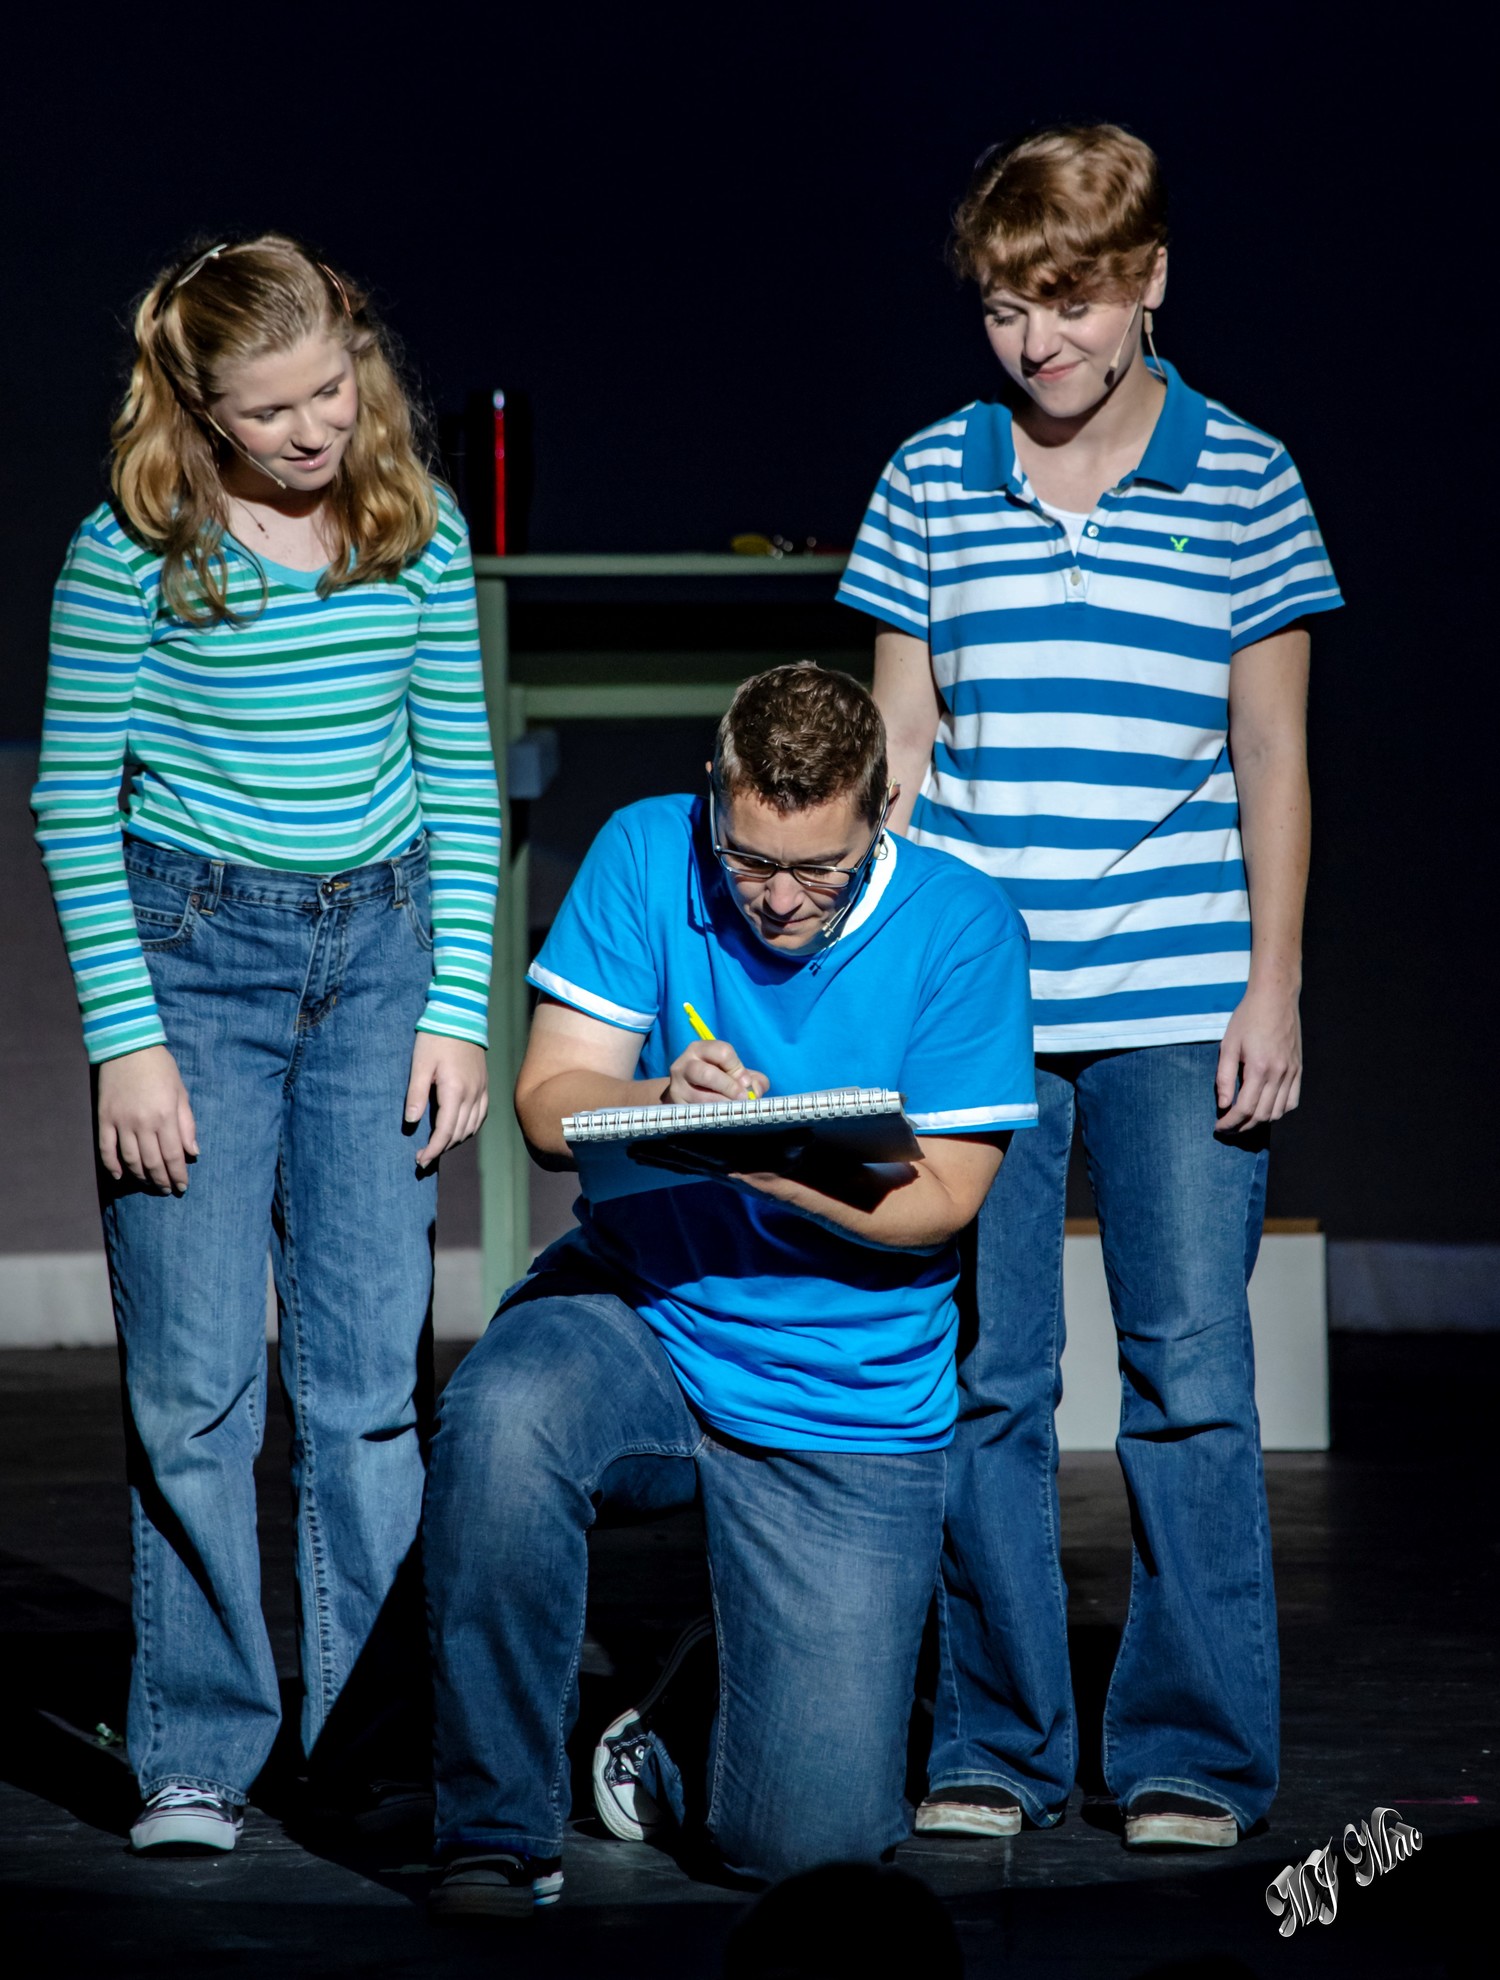 Review: FUN HOME at Wilmington Drama League - Welcome to the house on Maple Avenue 